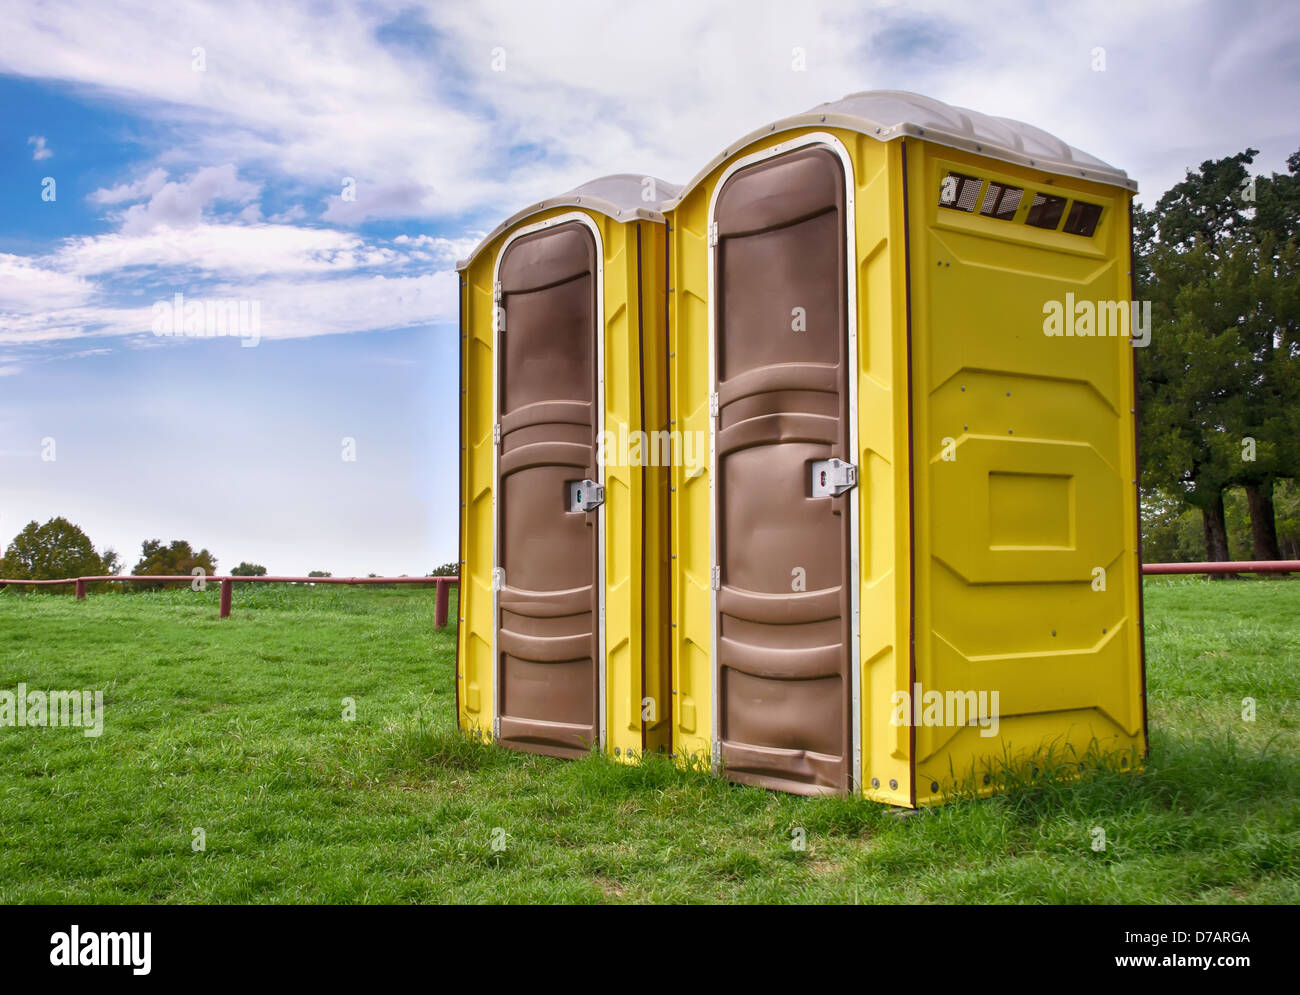 Two yellow portable toilets at a park Stock Photo